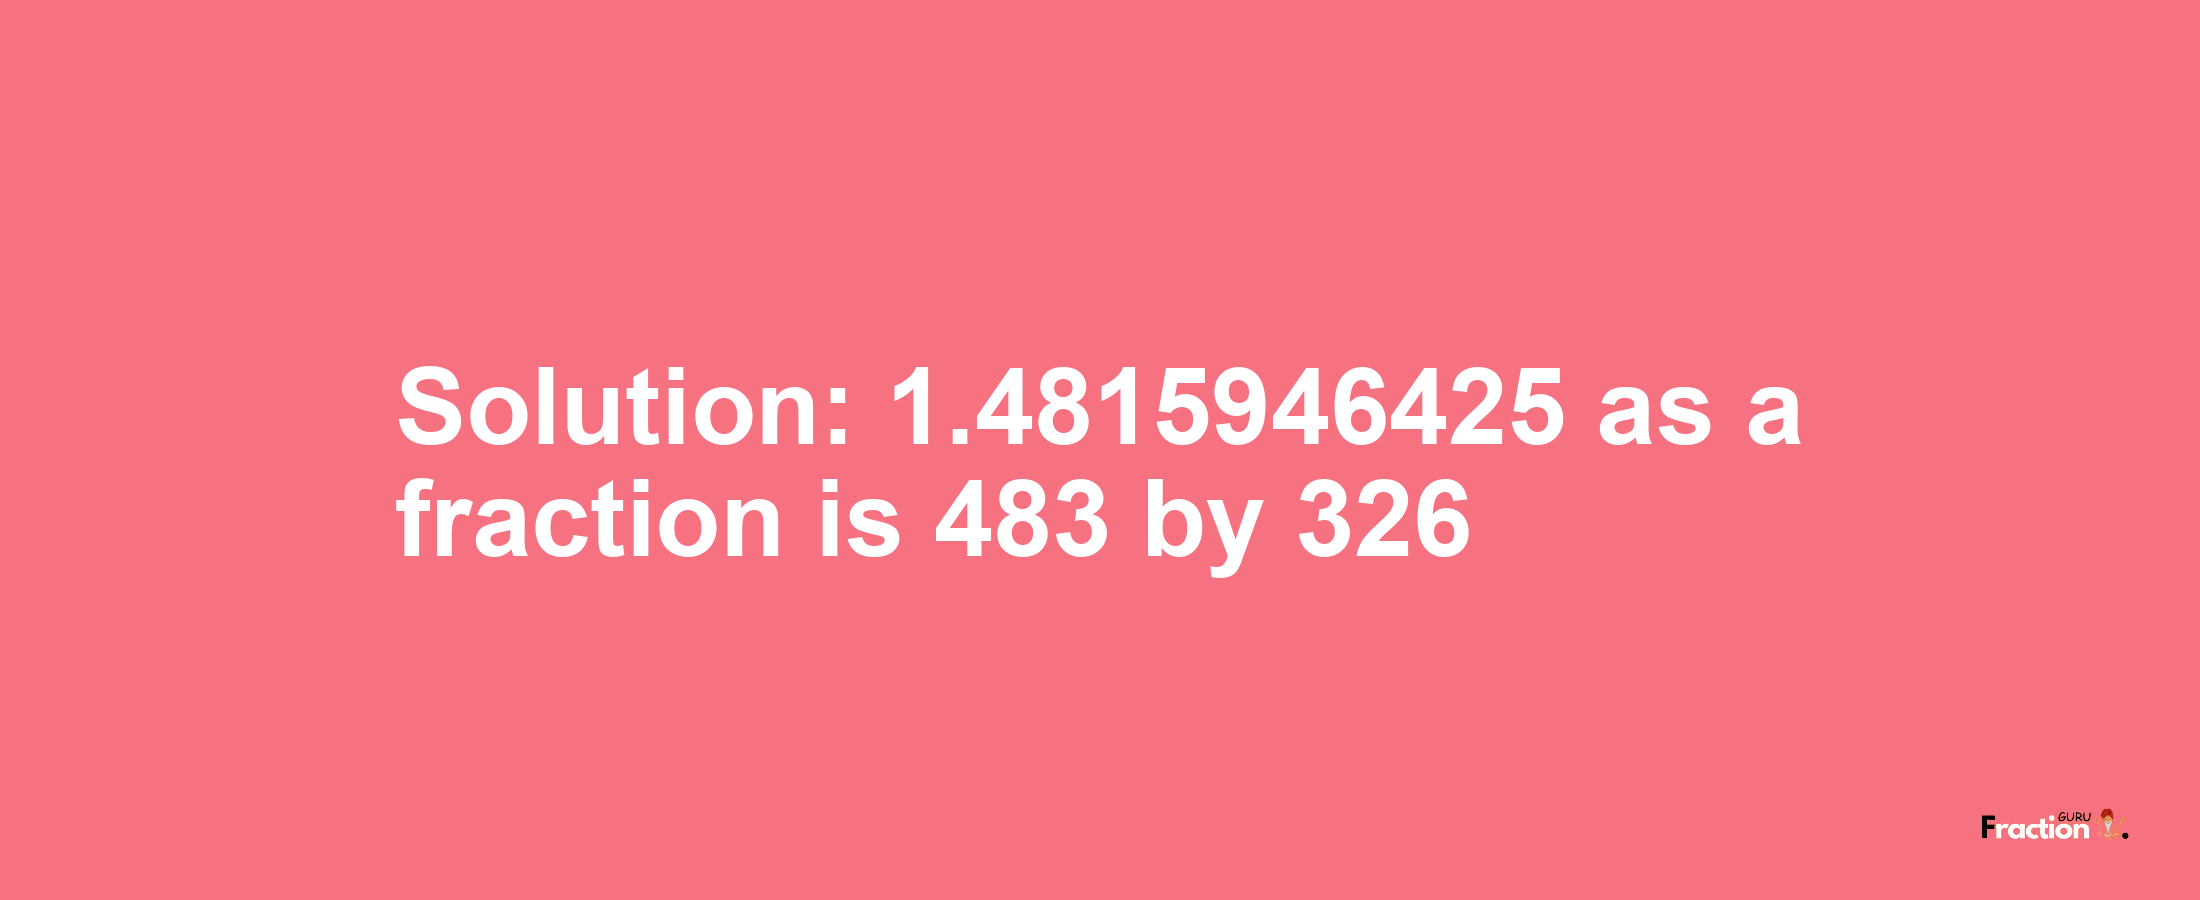 Solution:1.4815946425 as a fraction is 483/326